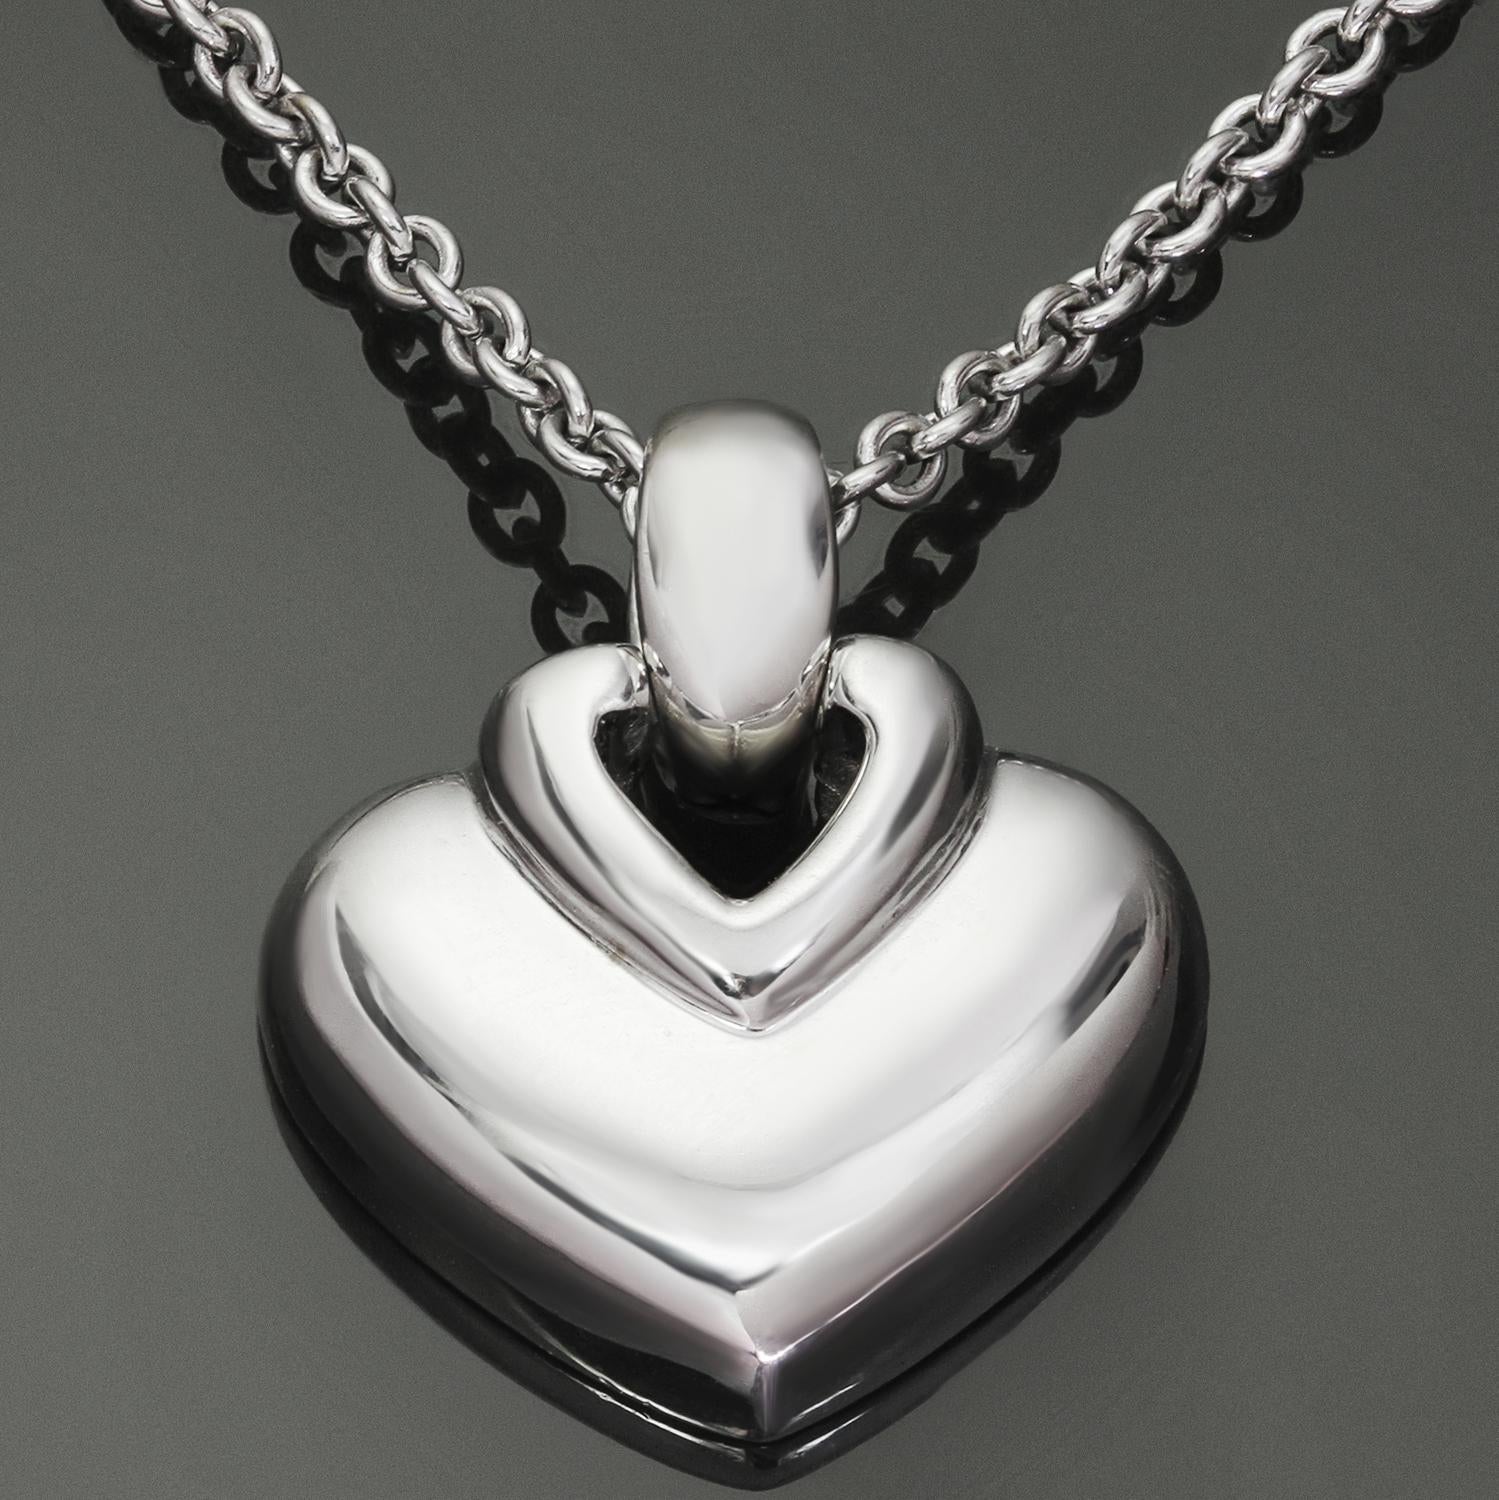 This classic Bulgari necklace features a heart-shaped pendant crafted in 18k white gold. Made in Italy circa 1990s. Measurements: 0.66